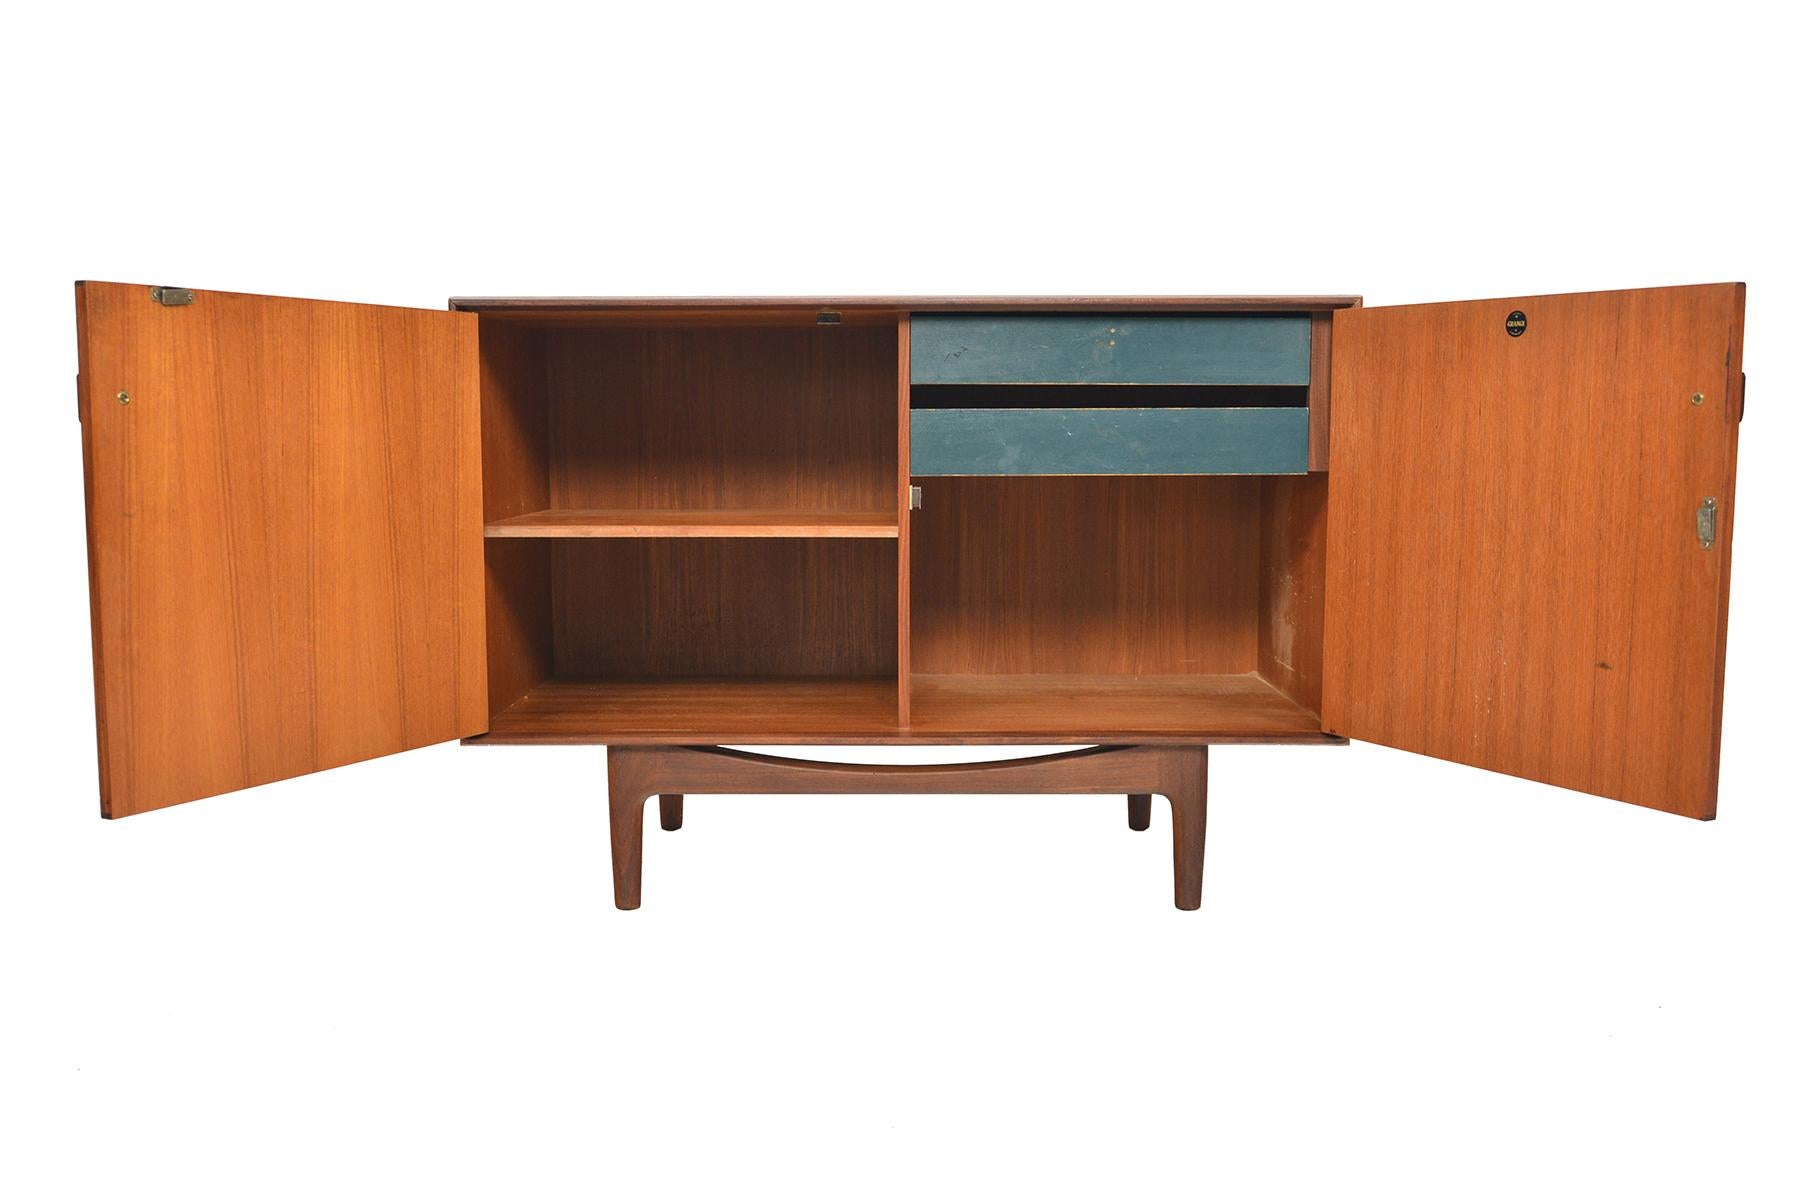 This small mid century teak credenza was designed by Ib Kofod Larsen for G Plan in 1961 for the Danish Range. Crafted in teak and afrormosia with handsomely refined lines, two wide doors open to reveal two bays an adjustable shelf and two drawers.